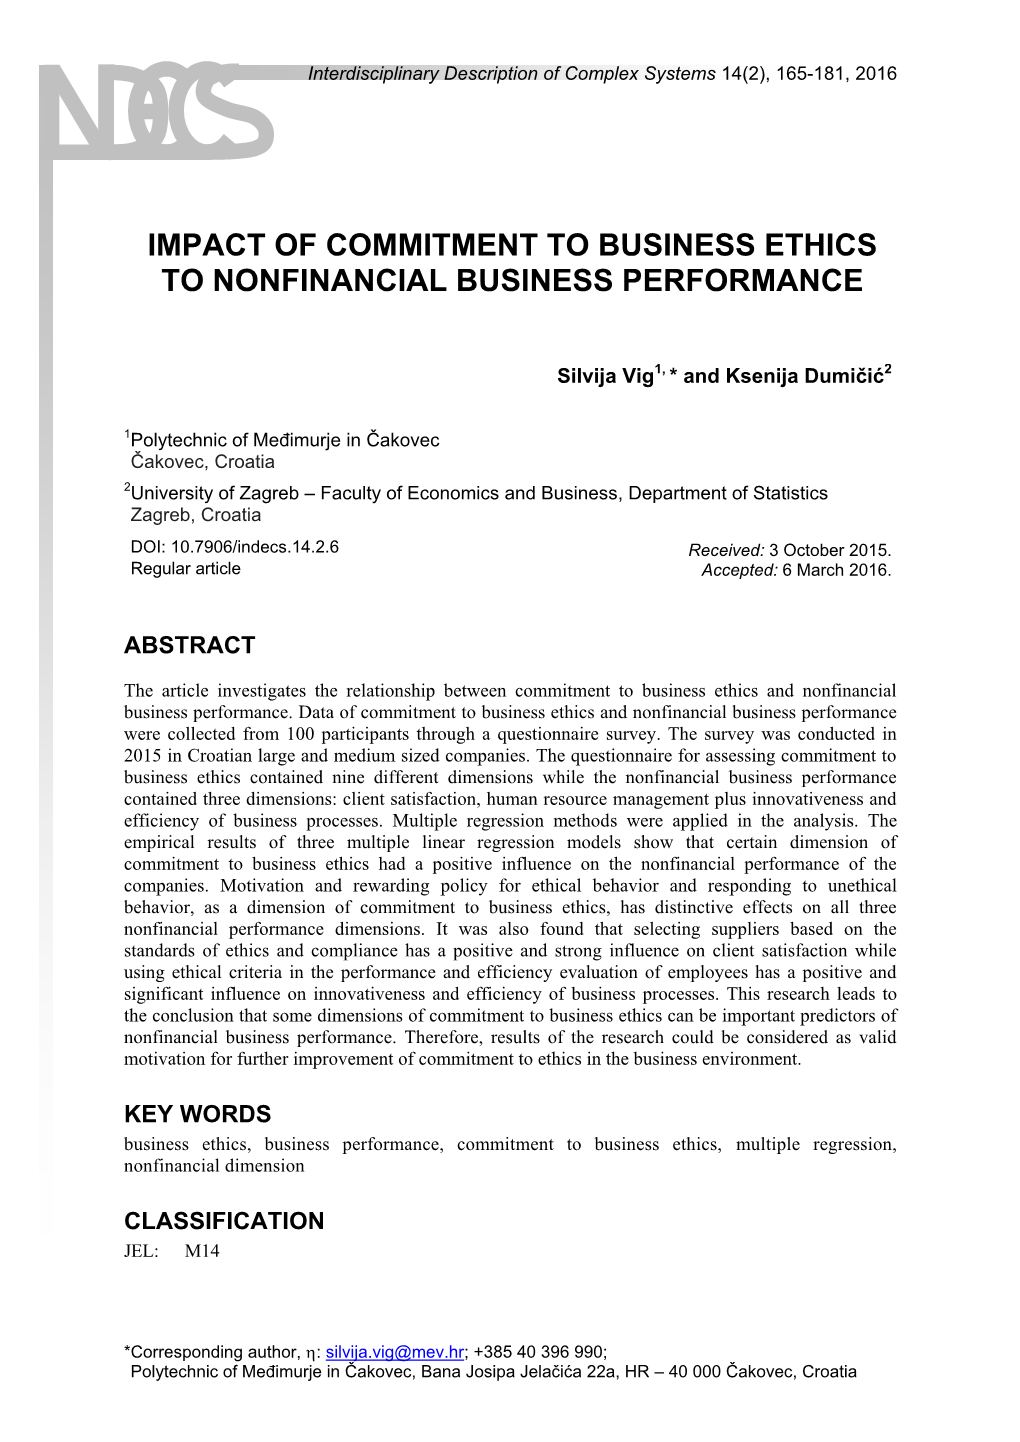 Impact of Commitment to Business Ethics to Nonfinancial Business Performance